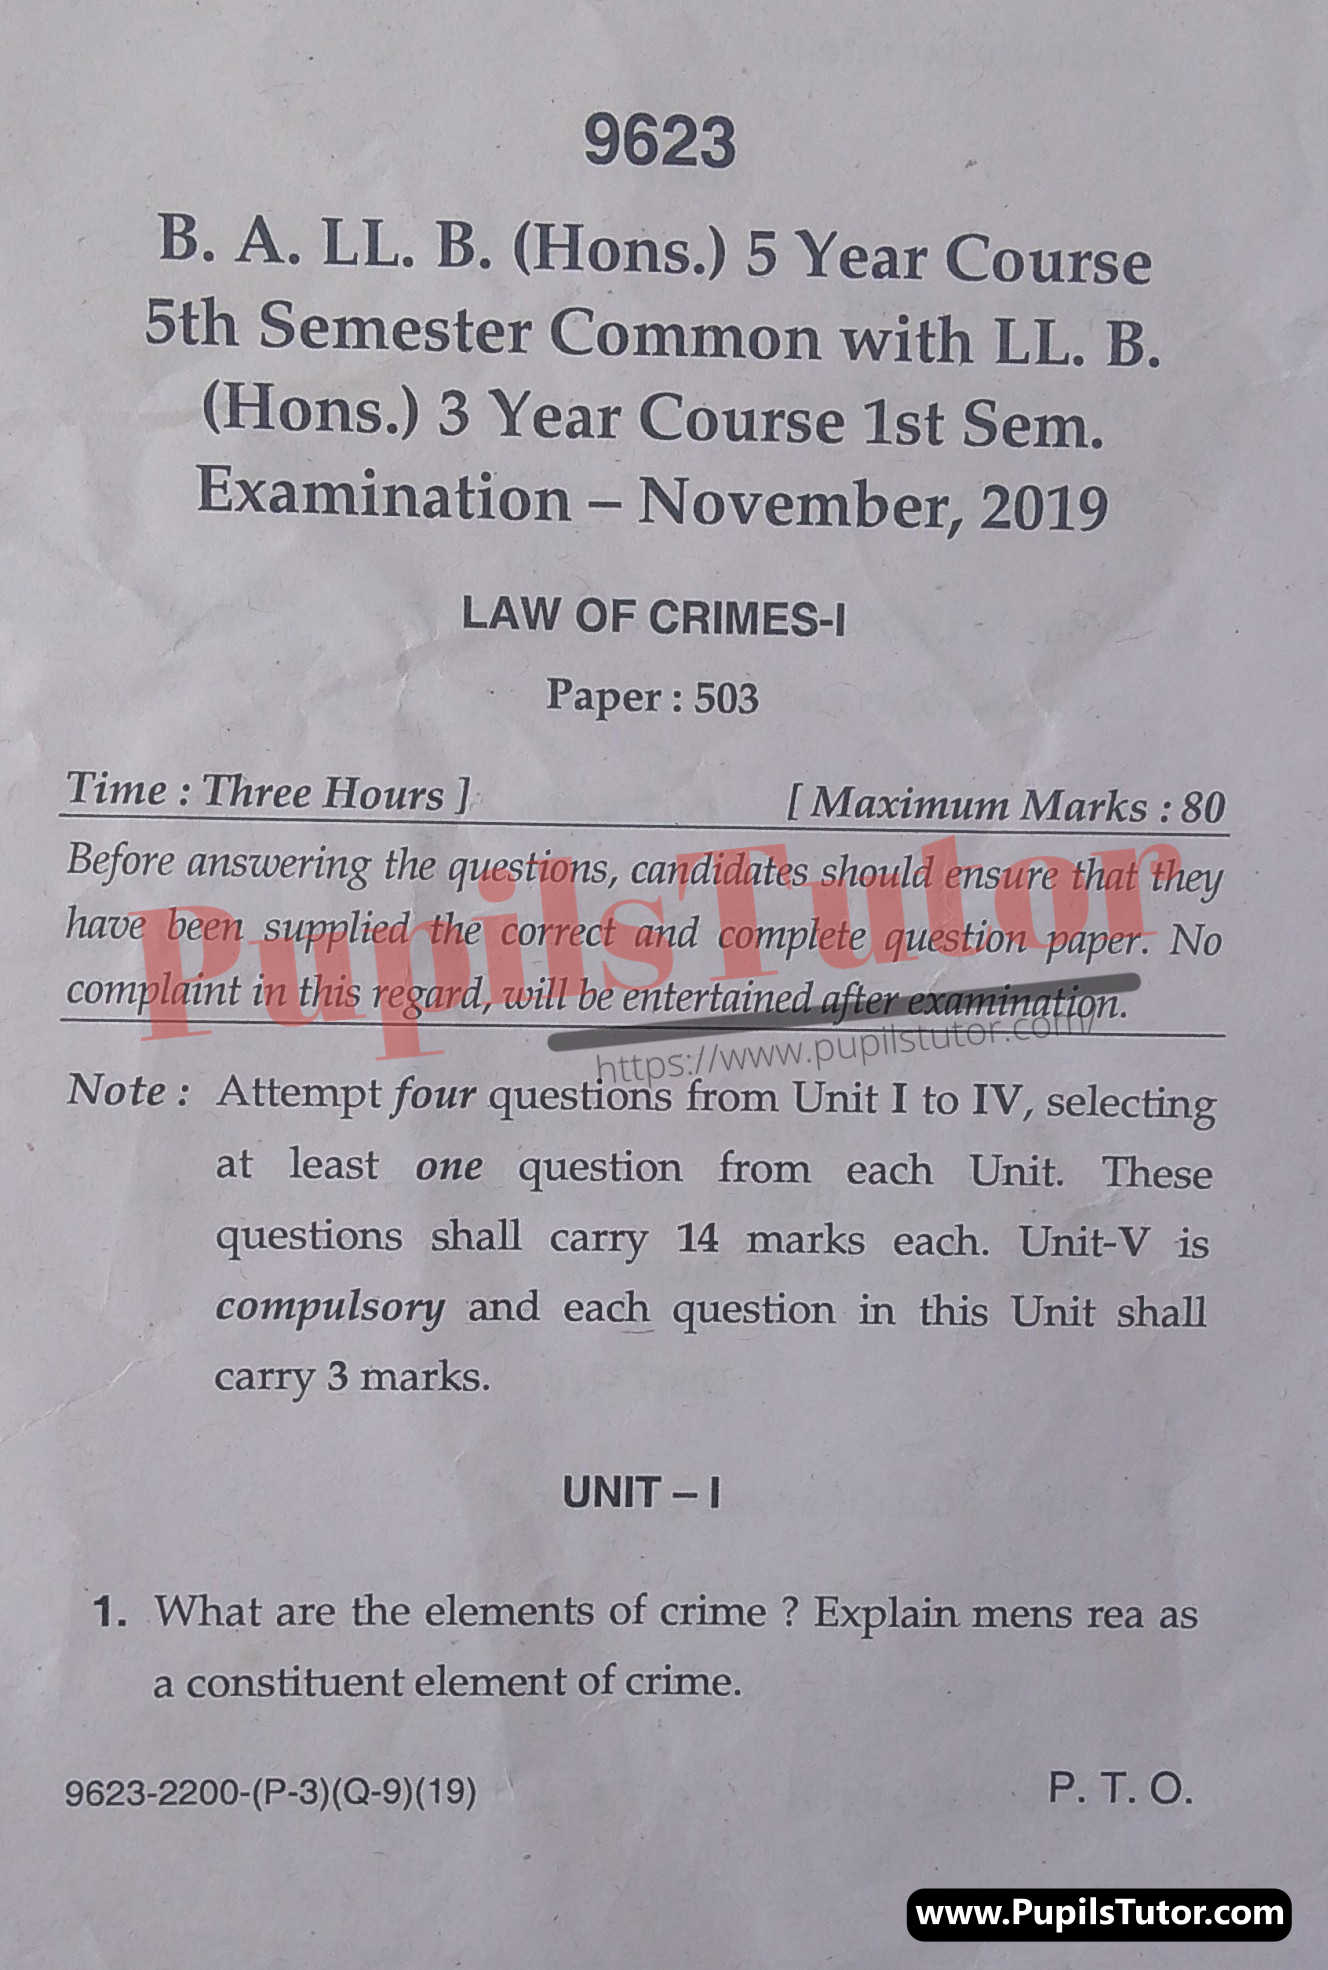 MDU (Maharshi Dayanand University, Rohtak Haryana) LLB Regular Exam (Hons.) First Semester Previous Year Law Of Crimes Question Paper For November, 2019 Exam (Question Paper Page 1) - pupilstutor.com